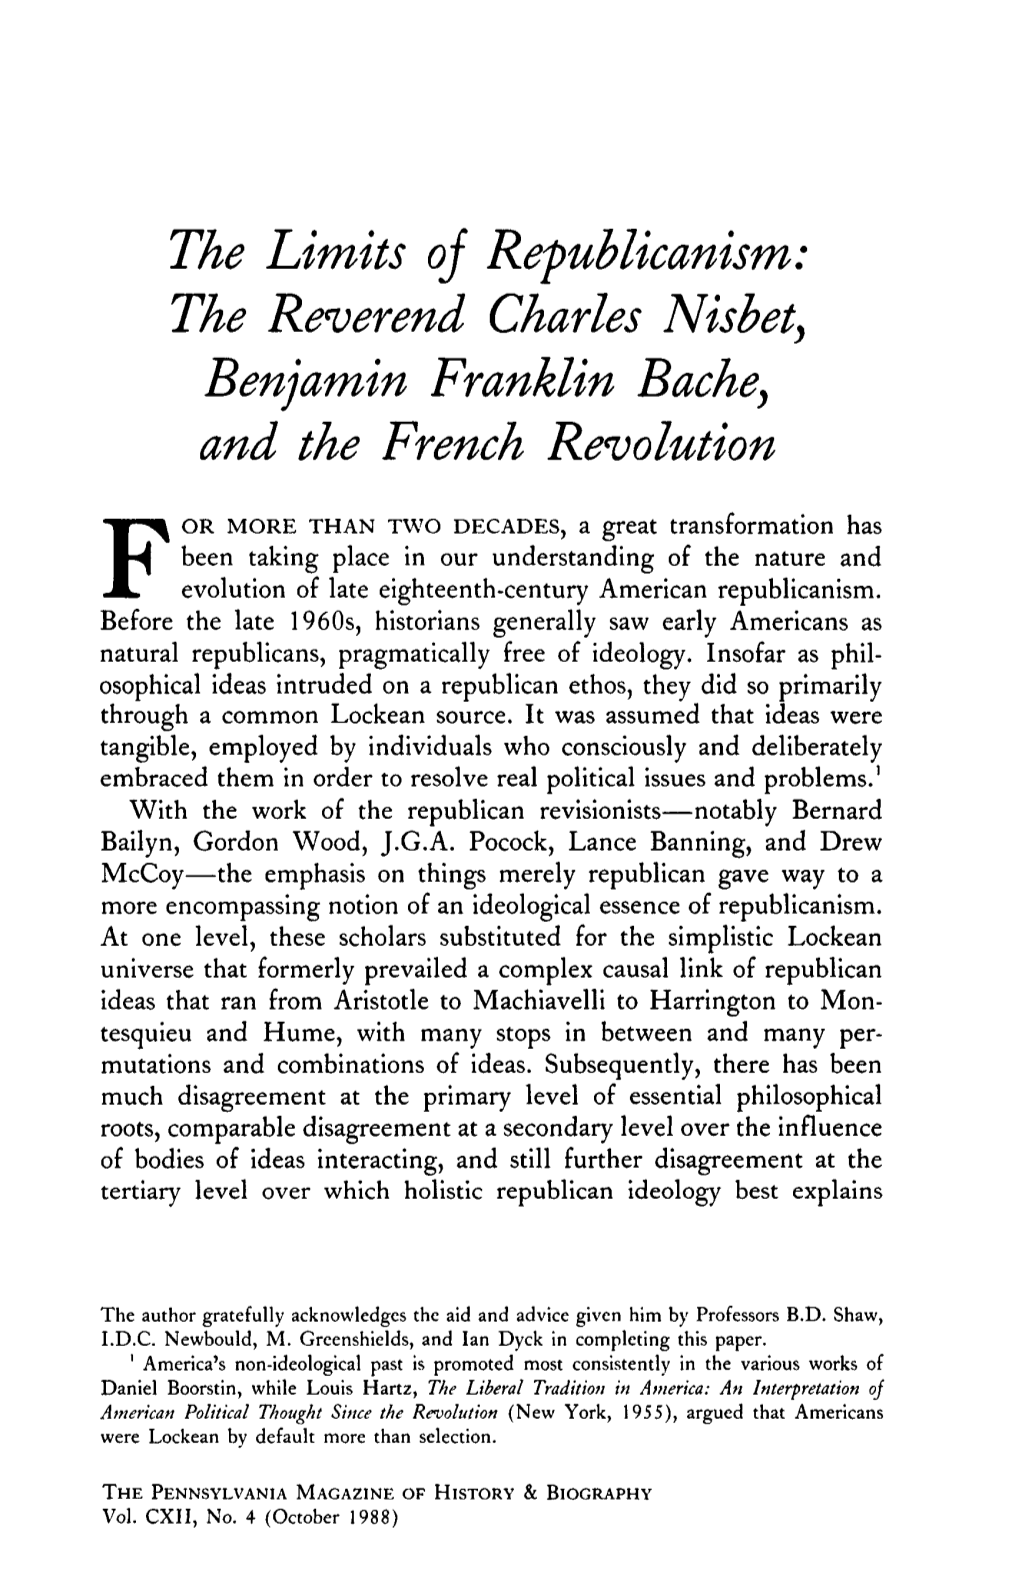 The Limits Oj Republicanism: the Reverend Charles Nisbety Benjamin Franklin Bache, and the French Revolution